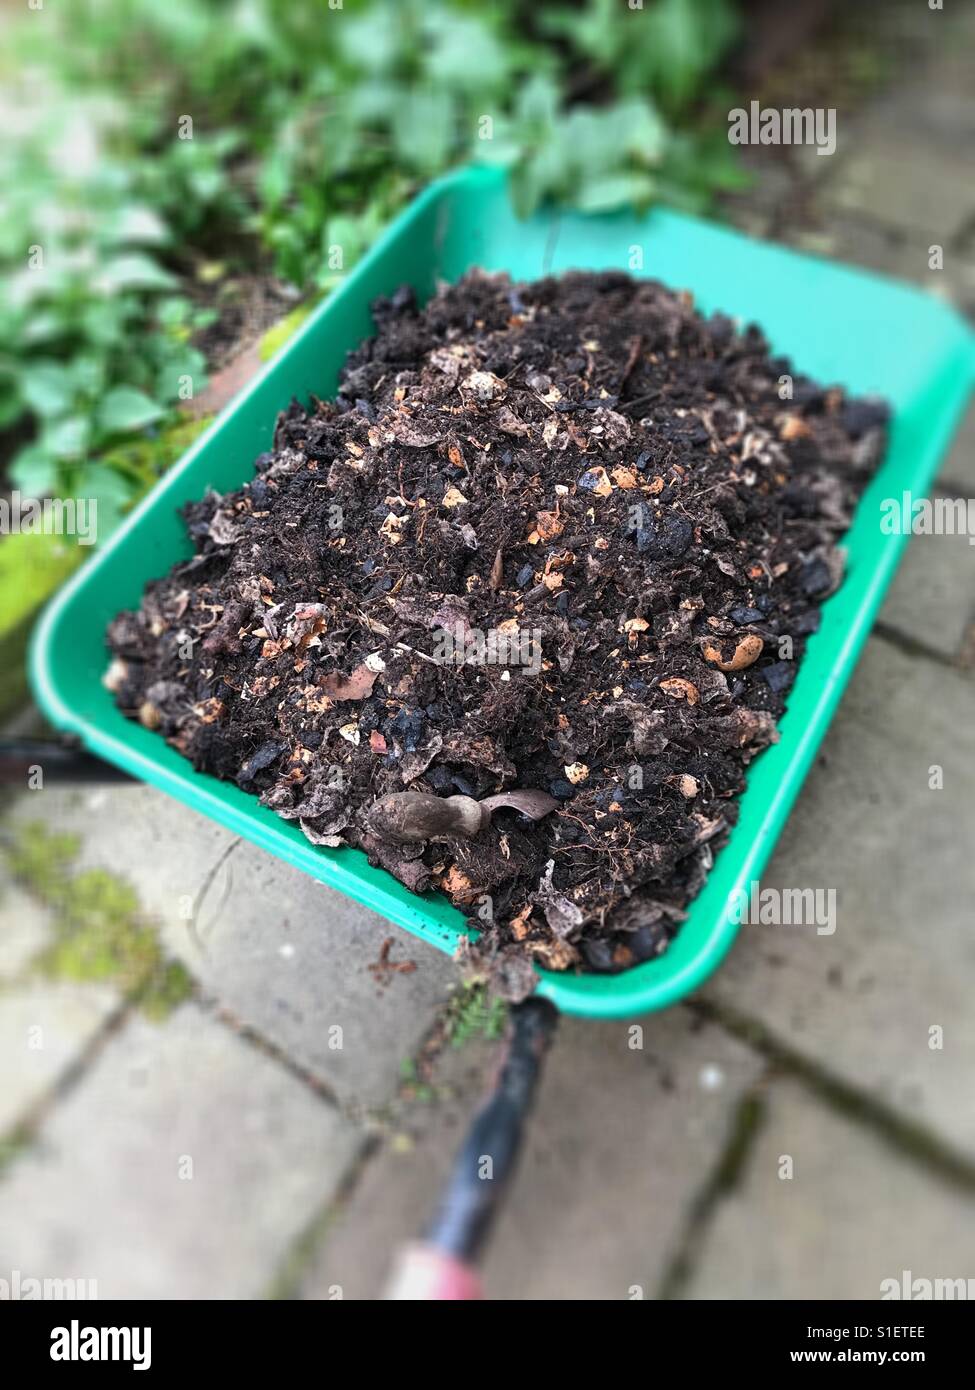 Homemade compost to enrich garden soil and soul through recycling household waste. Stock Photo